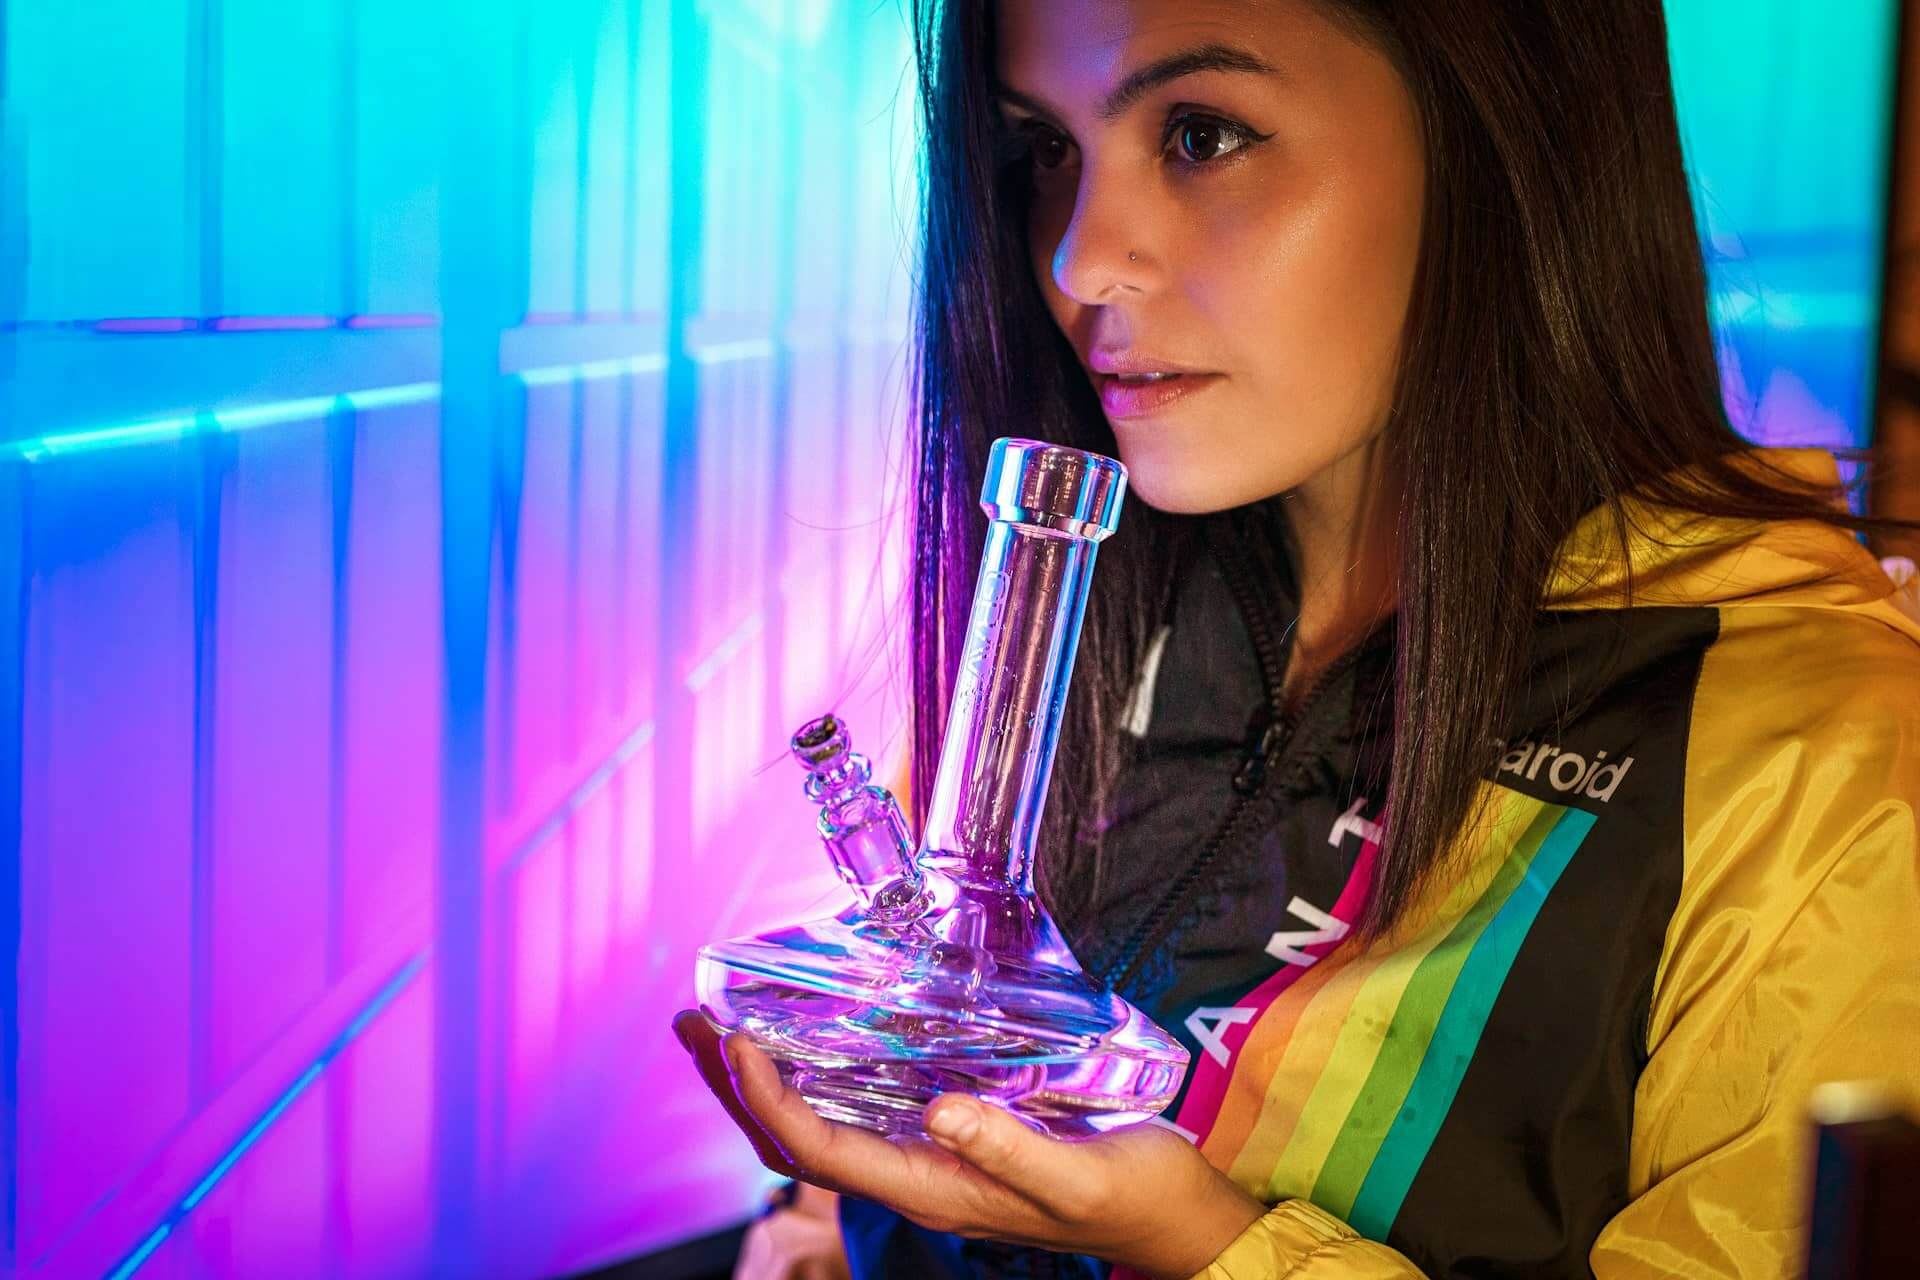 Woman with a glass bong